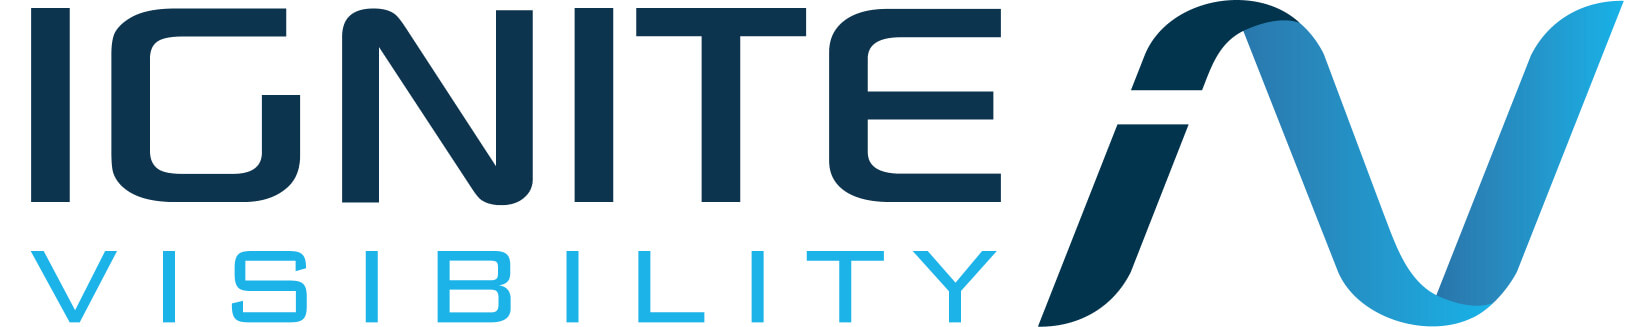  Best PPC Firm Logo: Ignite Visibility